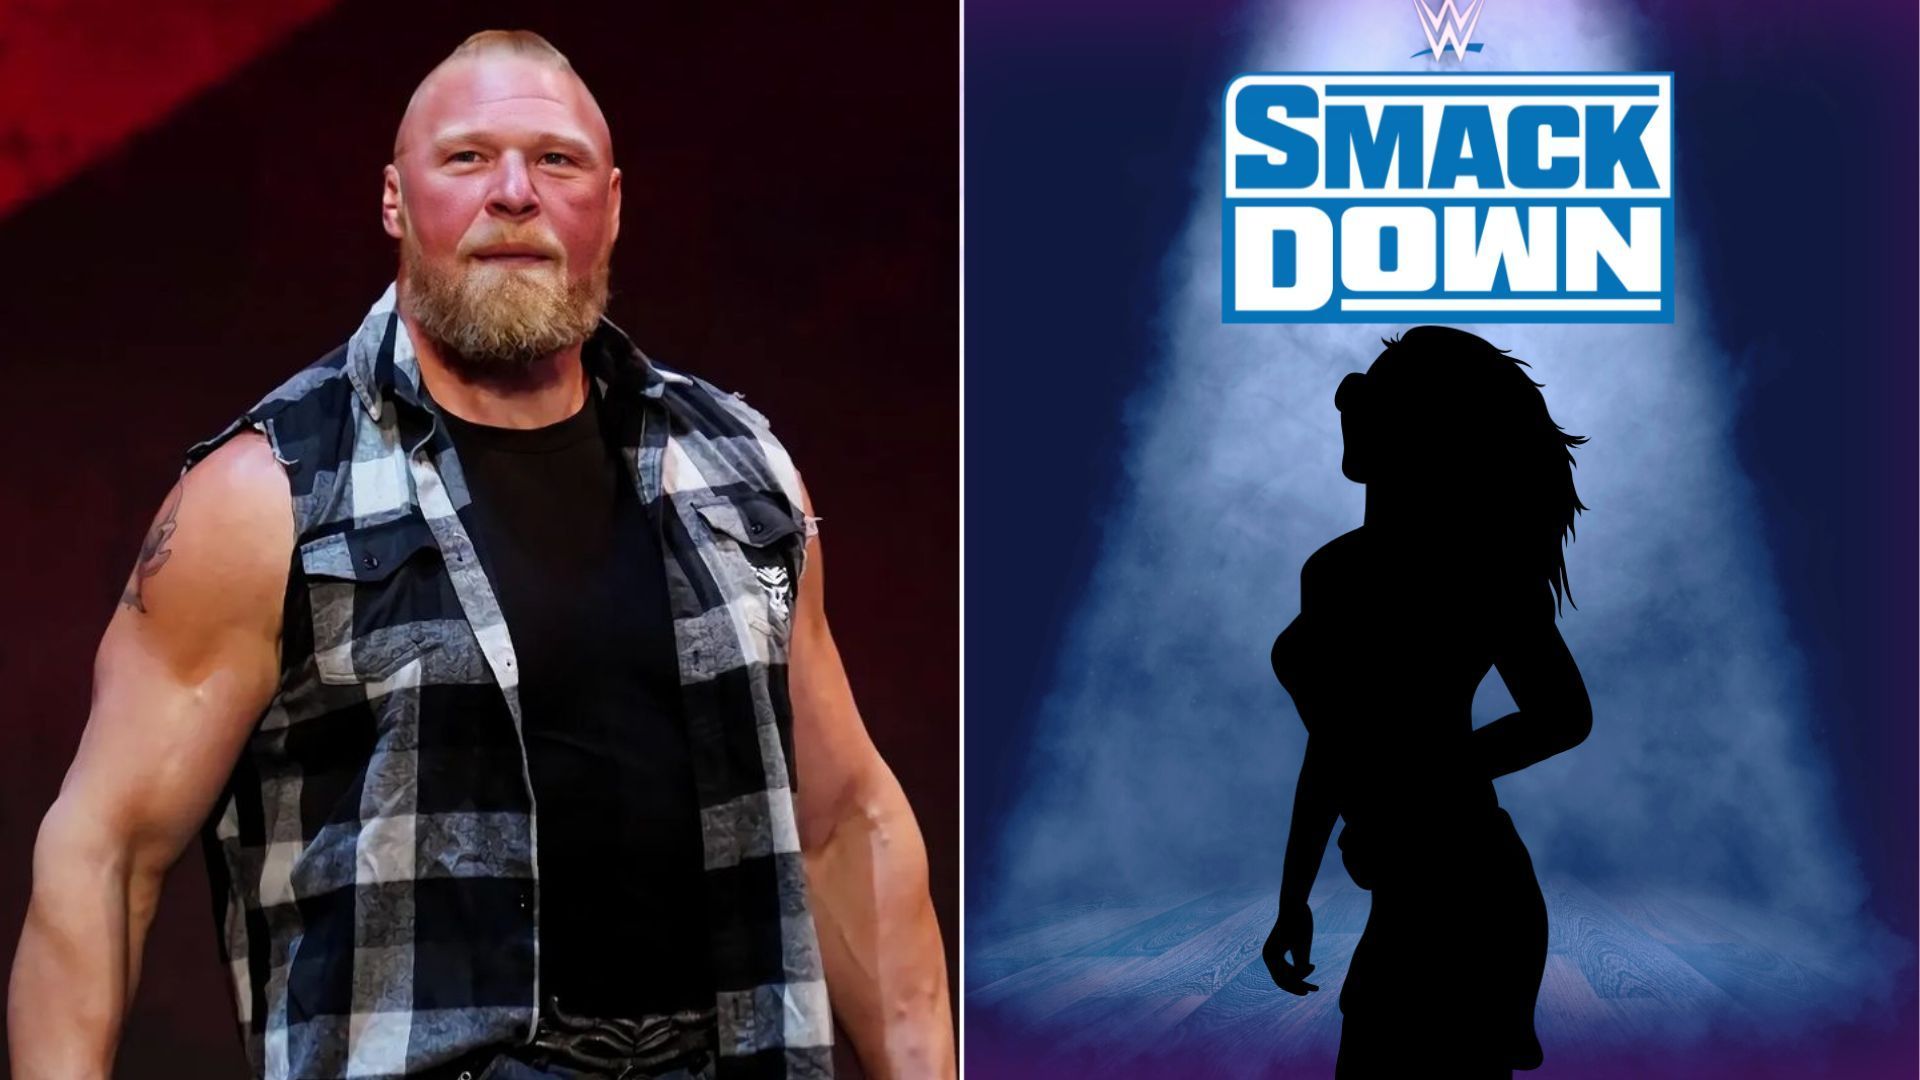 WWE wants a current star to be as big as Brock Lesnar